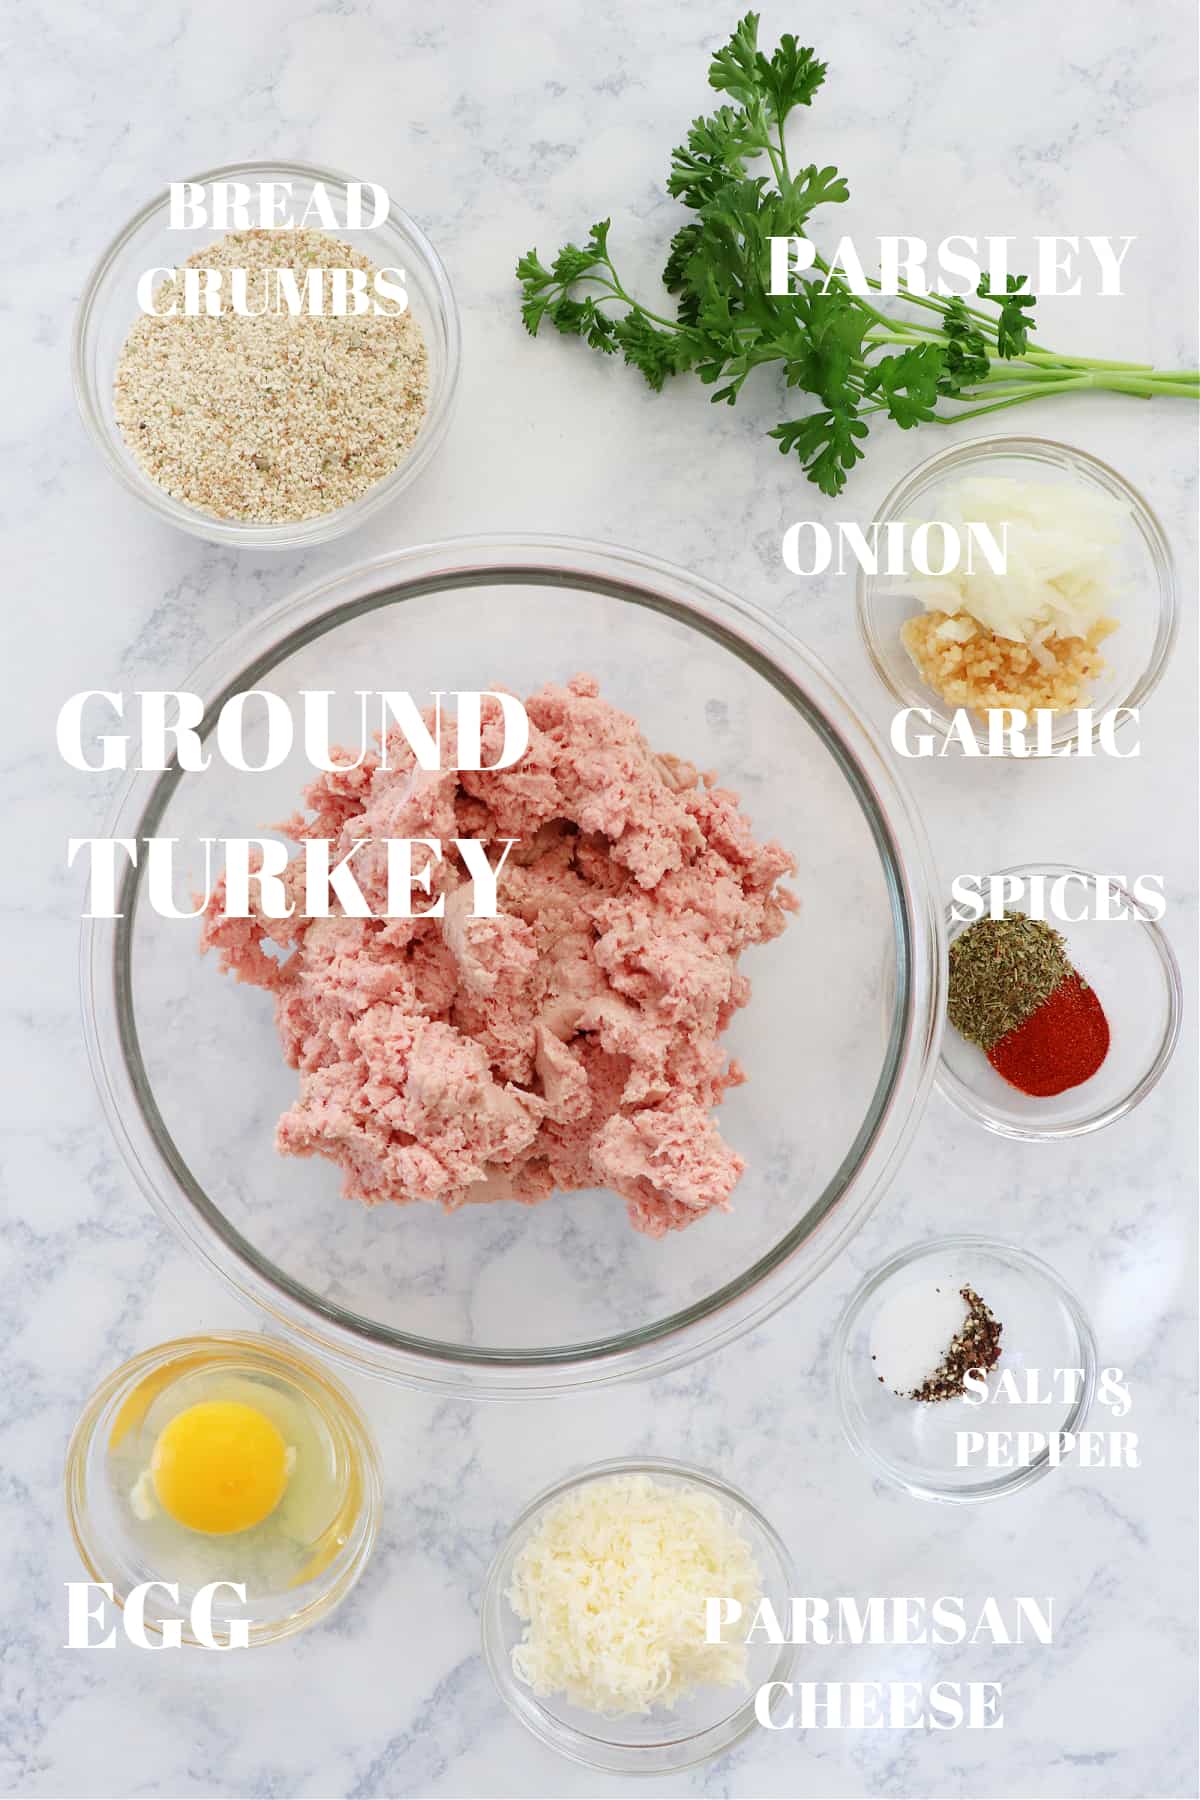 Ingredients for turkey meatballs on a marble board.